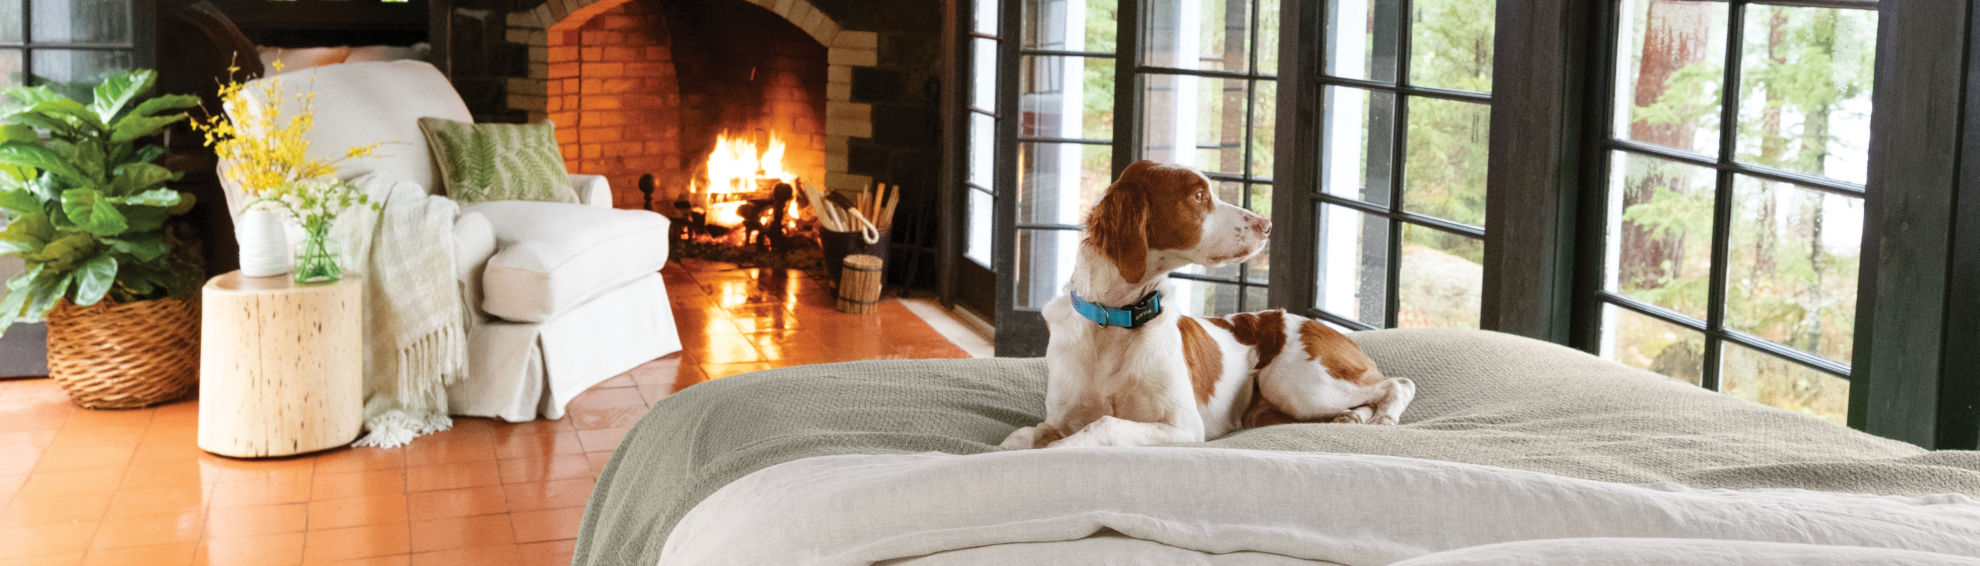 A dog looking out the windows of a comfortable room with a fire in a brick fireplace